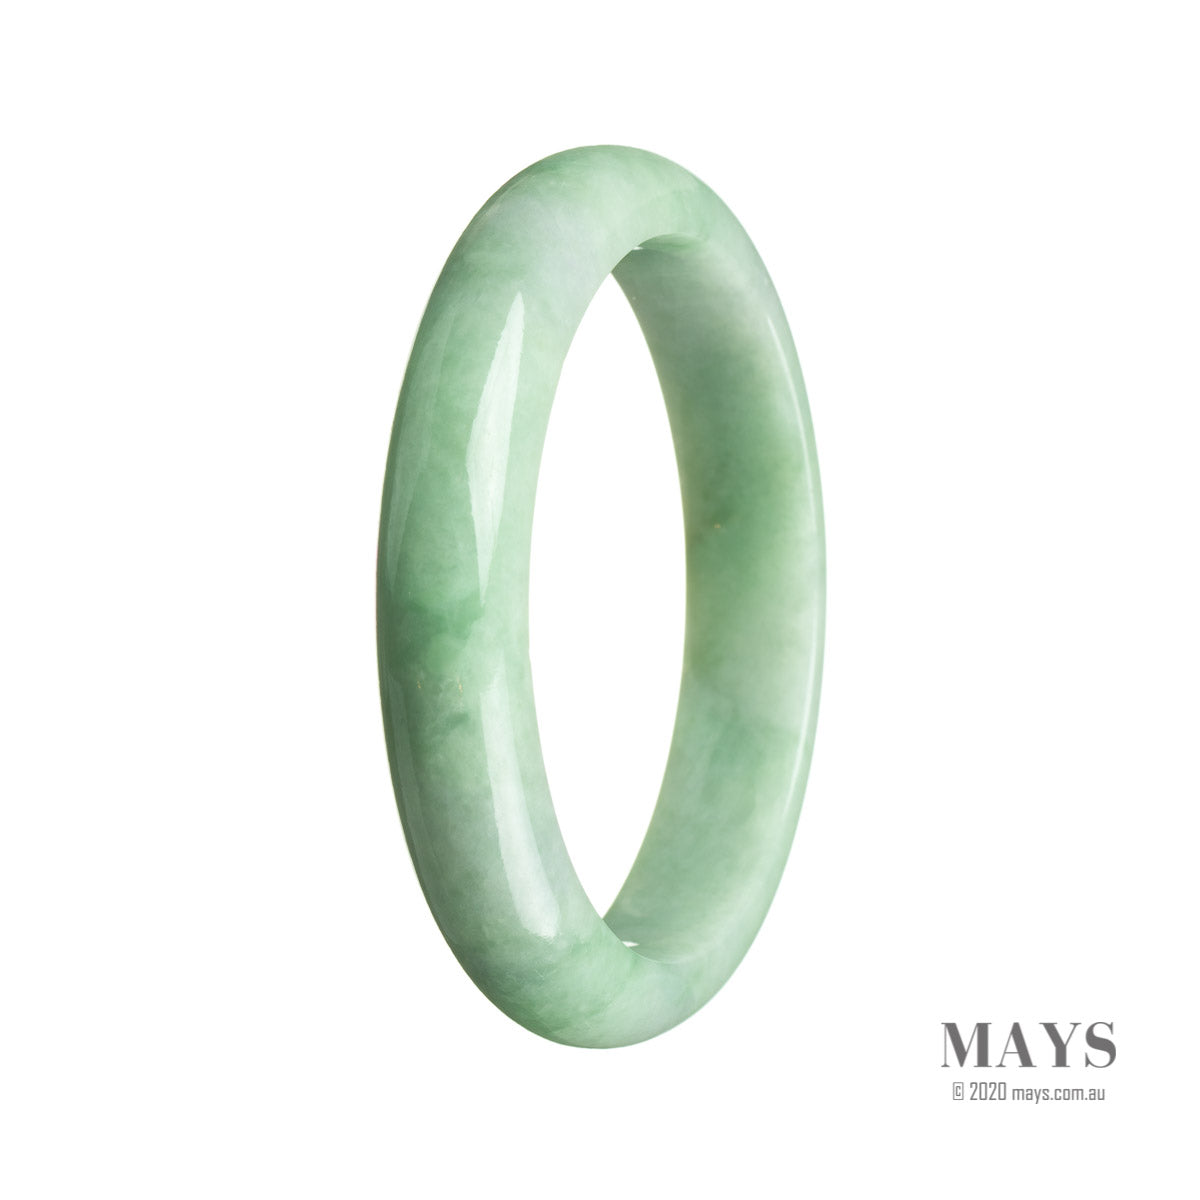 A close-up view of a certified untreated green traditional jade bangle. The bangle is 59mm in diameter and has a semi-round shape. It is from MAYS GEMS, a reputable jewelry brand.